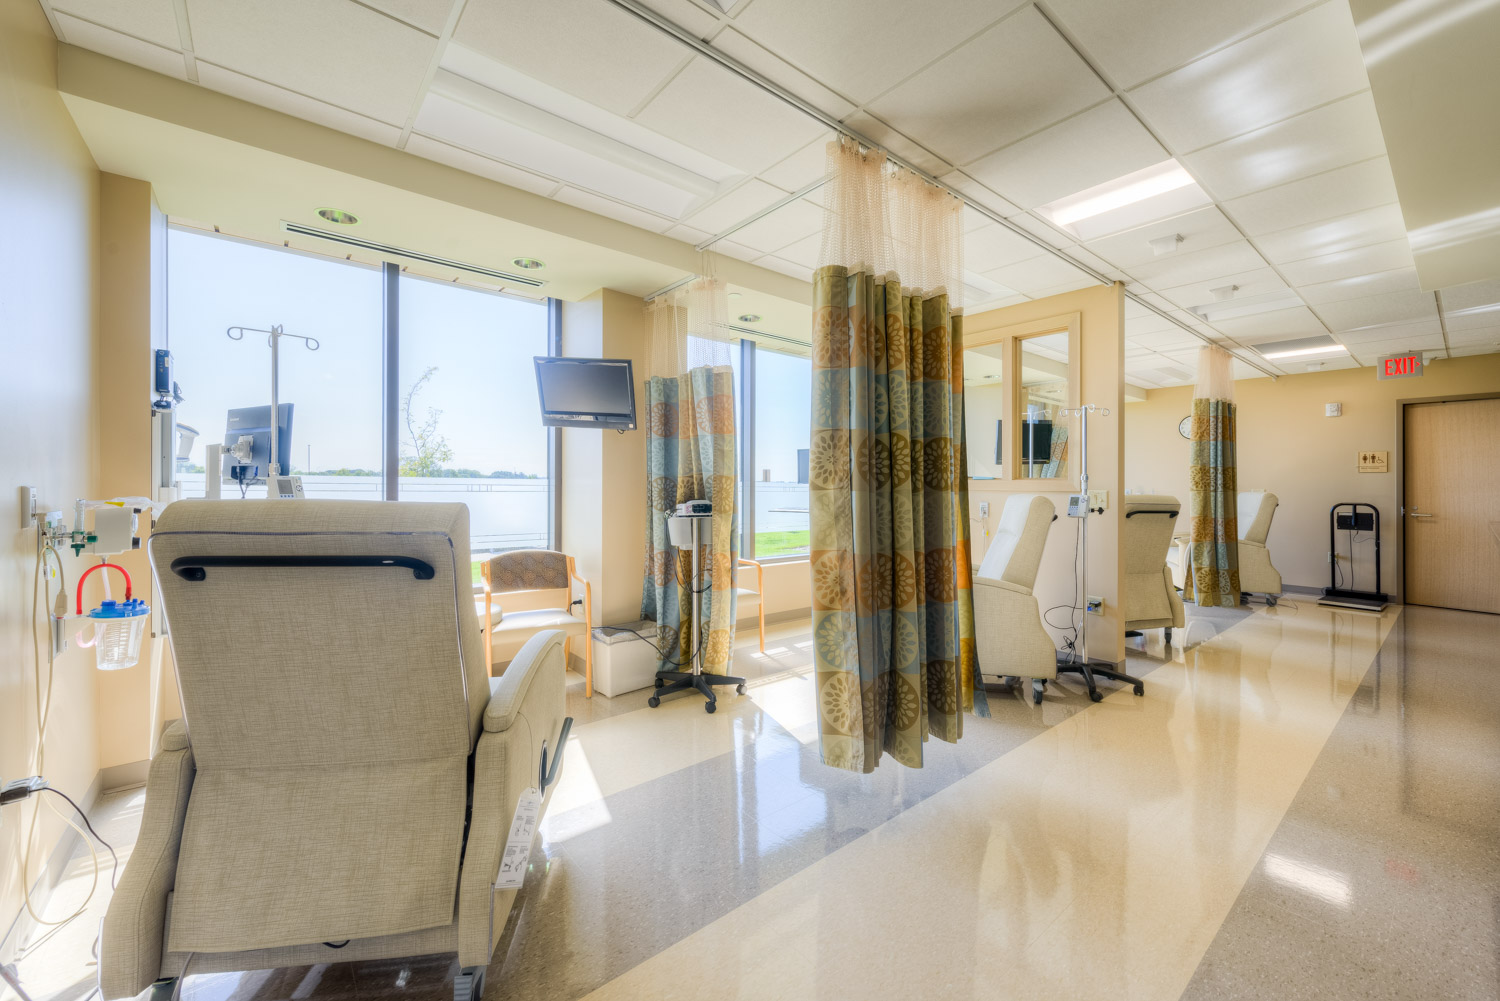 20160918_westernwisconsinhealth_replacementhospital_0577_hdr_150dpi_1500px